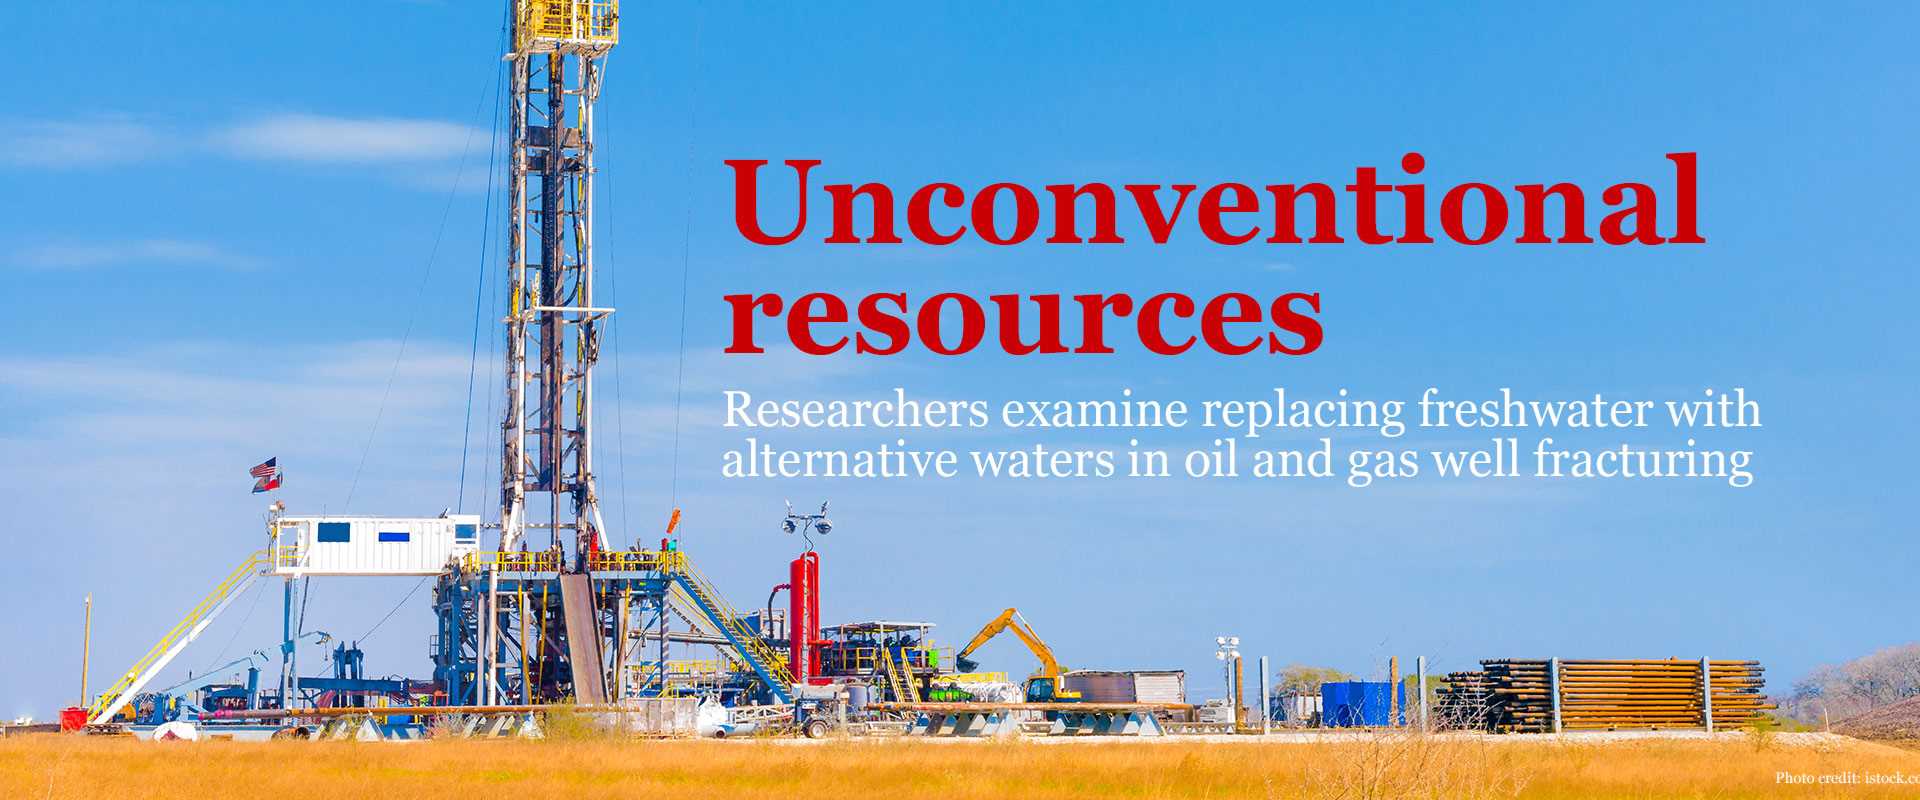 Unconventional resources